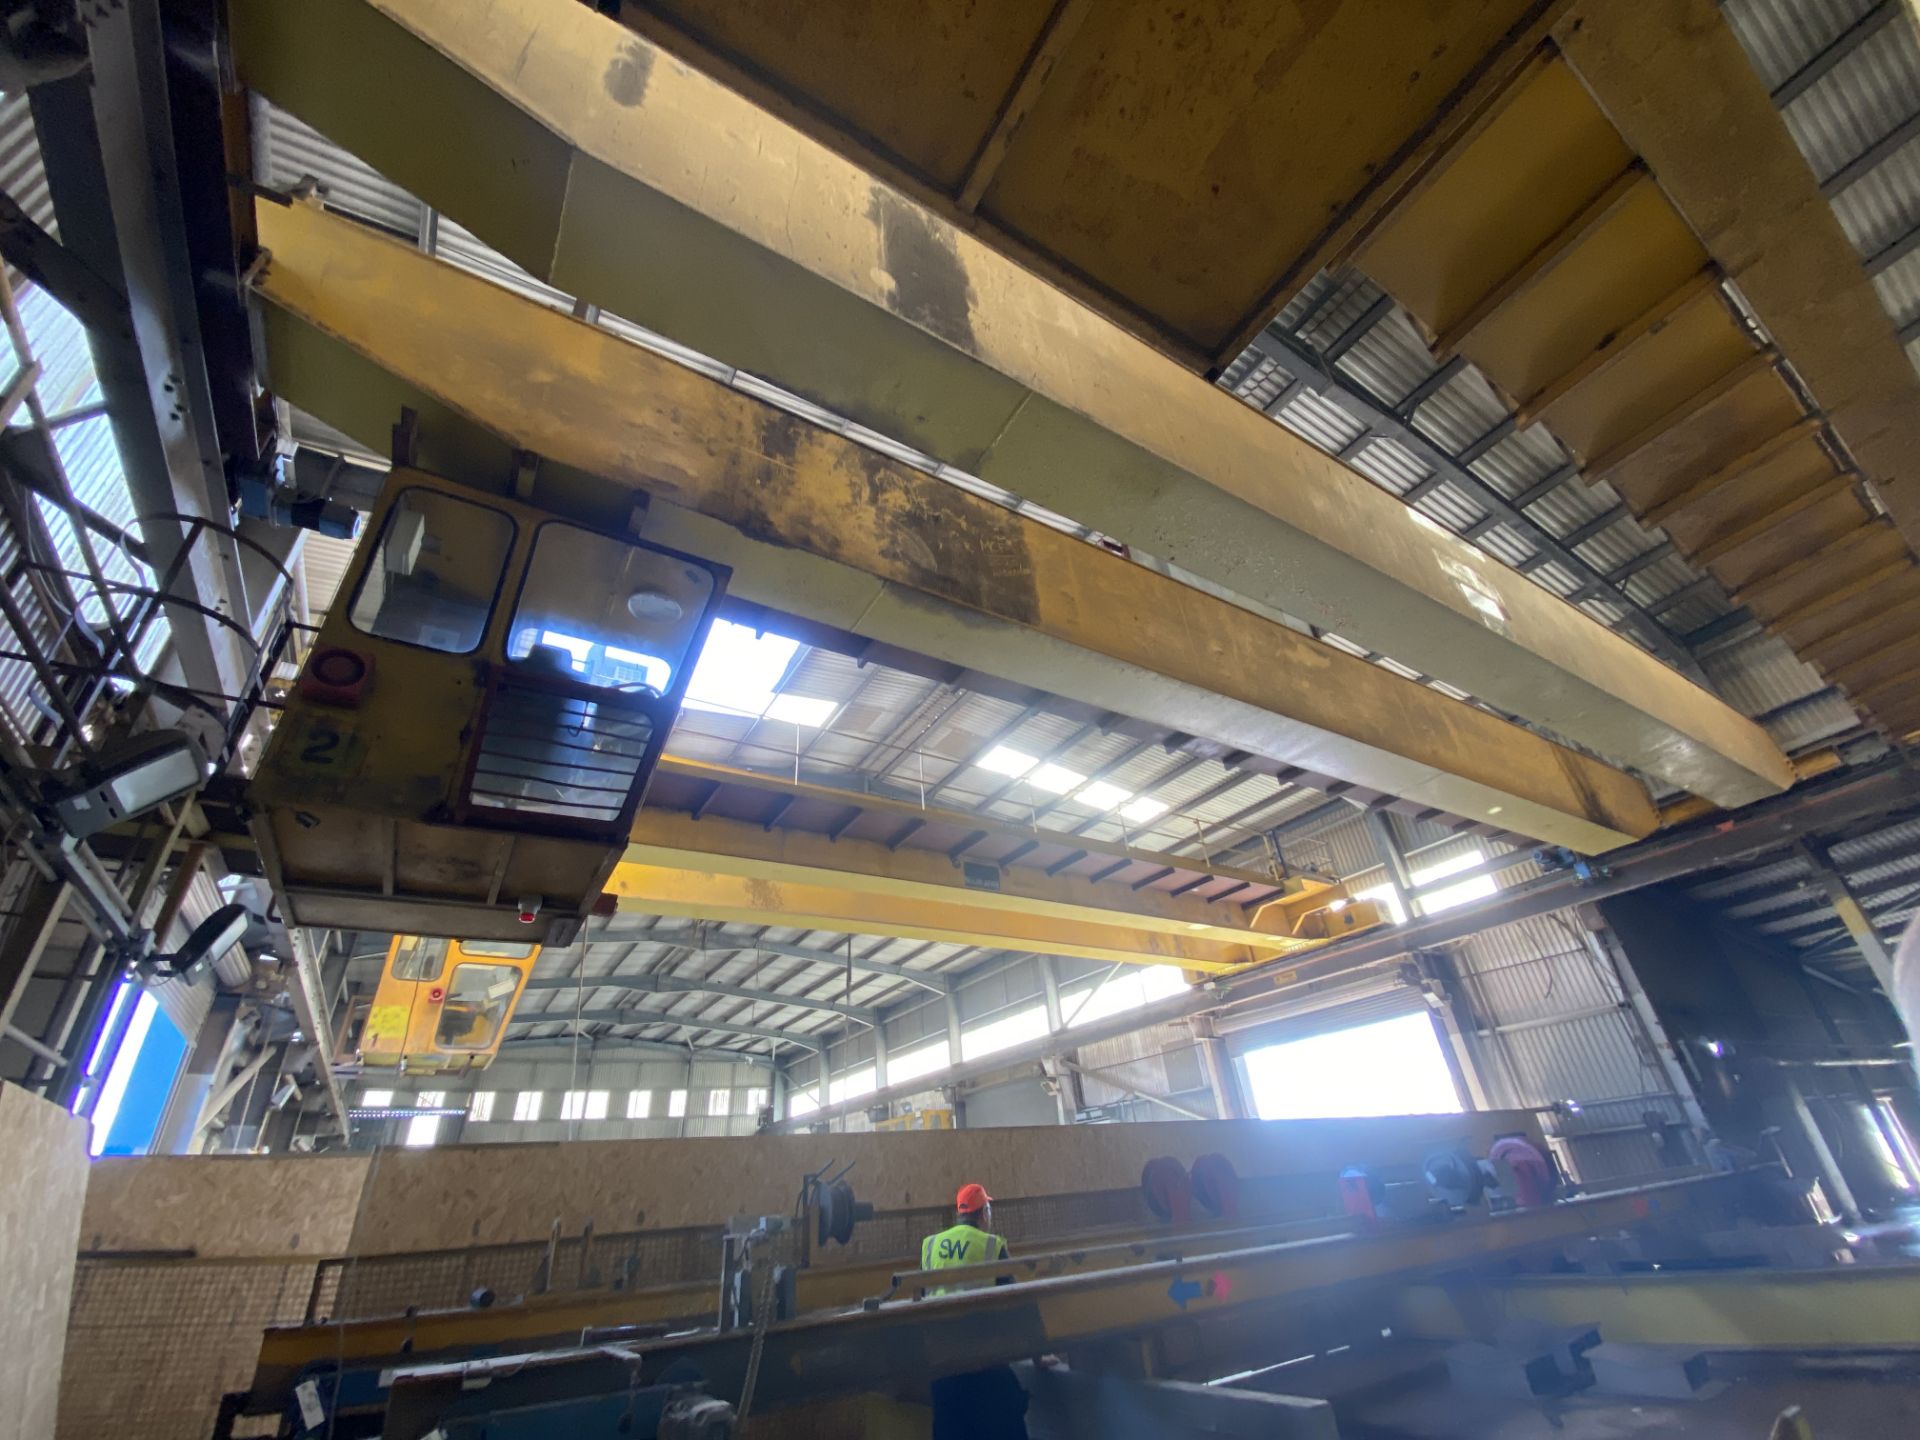 2 x 16,000kg SWL TWIN GIRDER TRAVELLING OVERHEAD CRANE, serial no. AP107(incomplete, no carriages or - Image 2 of 5